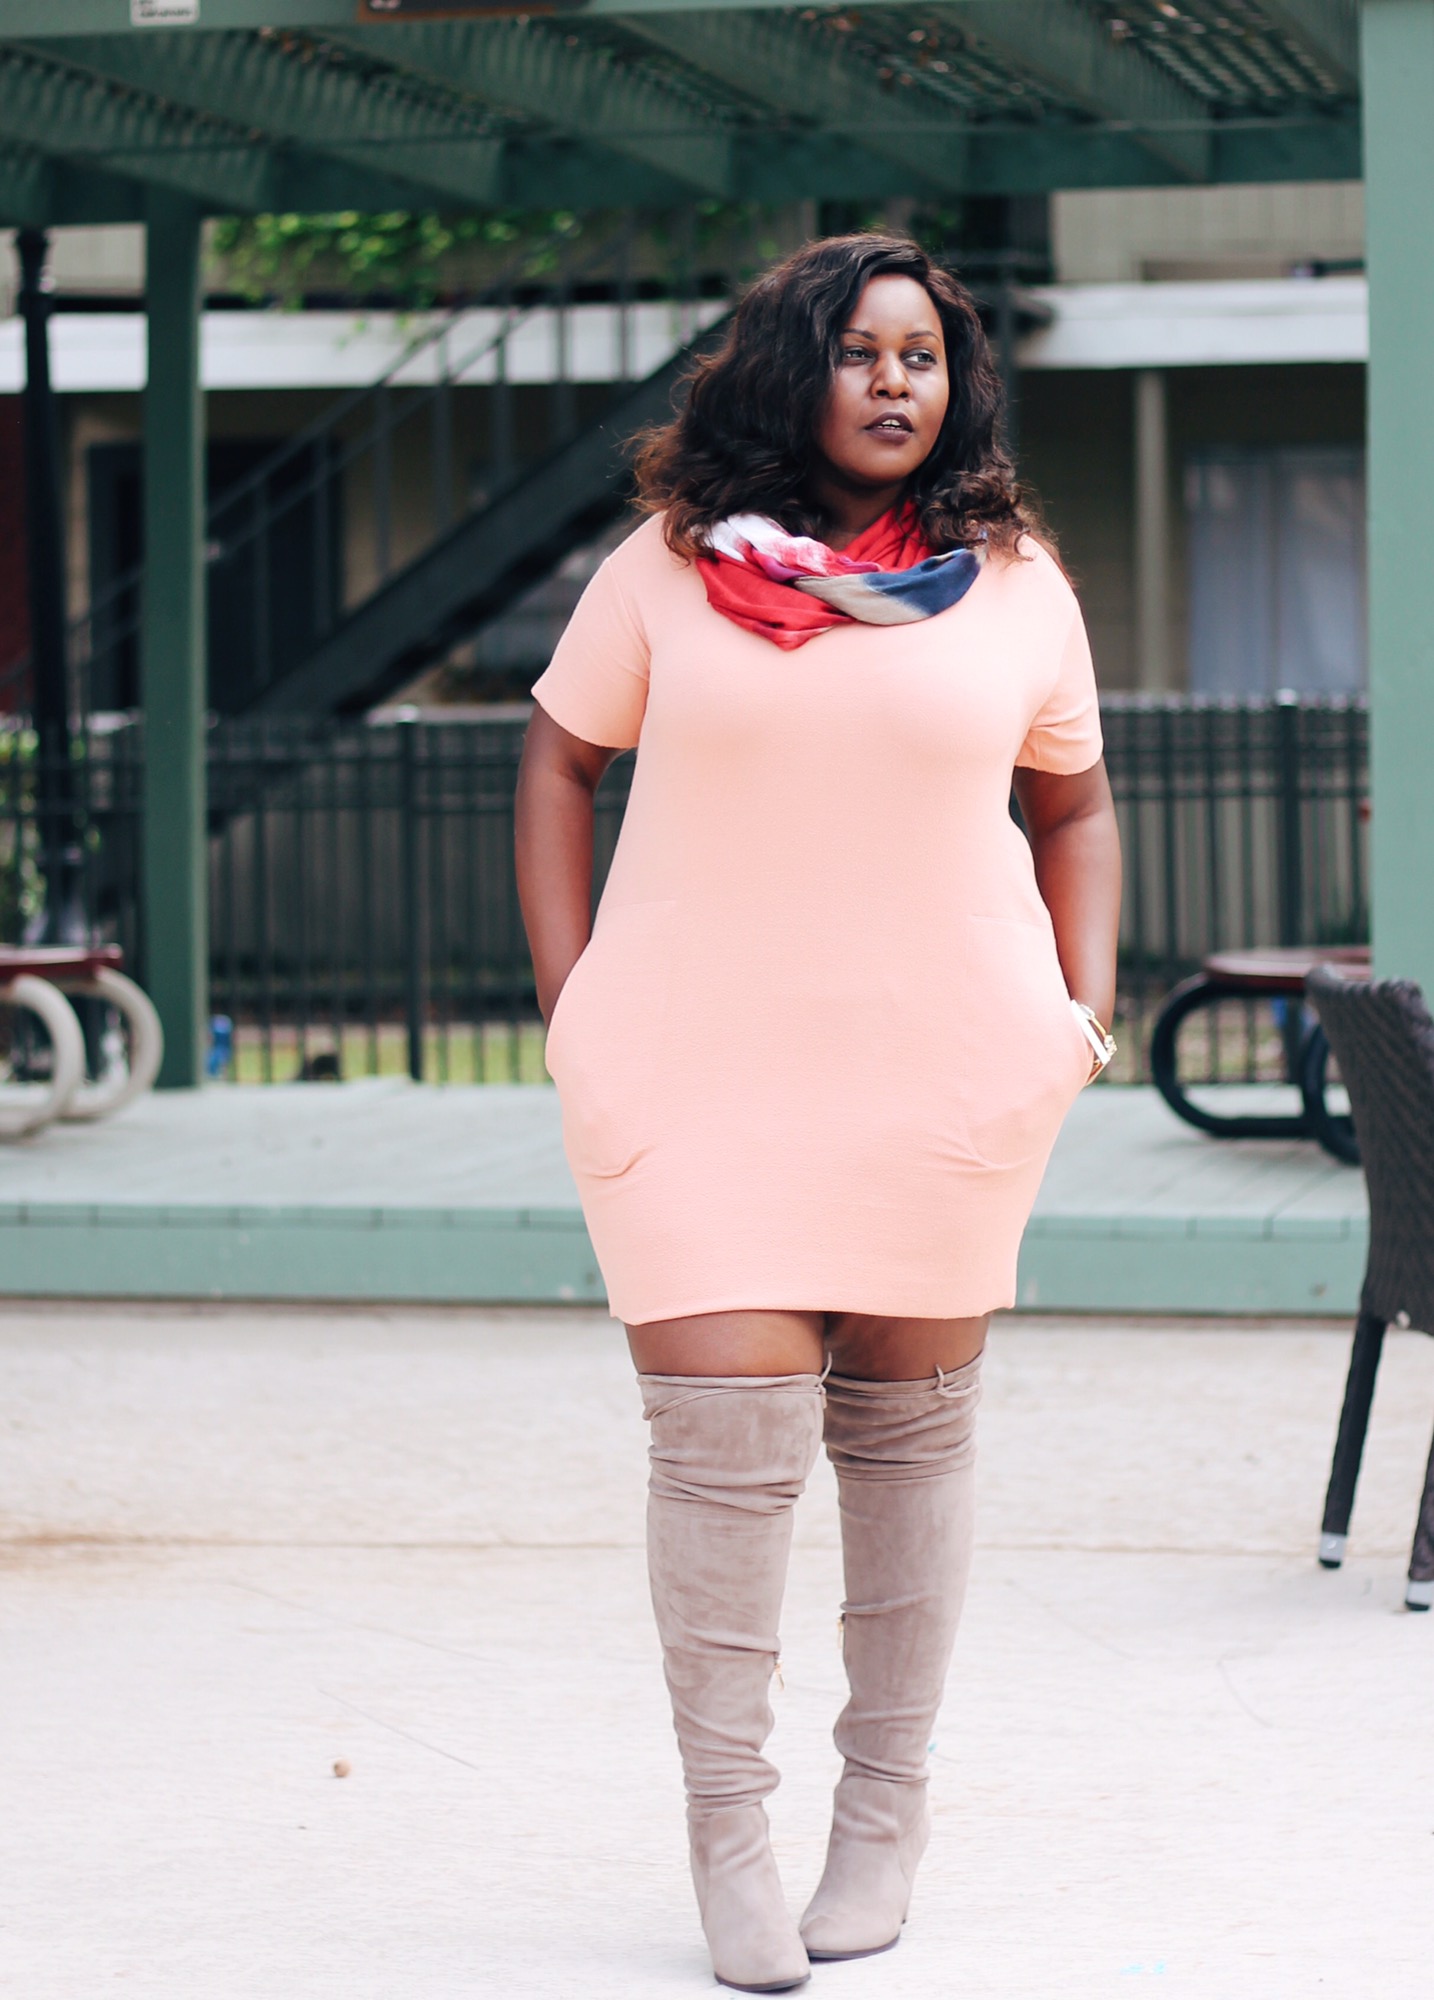 asos curve bloggers, beautiful curvy girls, curvy style dark skin fashion blogger curvy style blogger, dark skin beauty blogger, dark skin blogger, houston blogger, inspiration for 2016, inspiring bloggers and blogs, new years resolutions, plus size blogger, quotes for 2016, relationship advice blogs, rules to live by in the new year, texas blogger, travel blogger, ugandan blogger, ugandan fashionista, ugandan style blogger, african print ankara skirt styles, where to get african print clothes in America and uk, exposure african crafts in kampala uganda, kyaligonza kampala african material, Steve Madden Bowwtye Heel Sandal, catherine malandrino boots, zara, tjmaxx